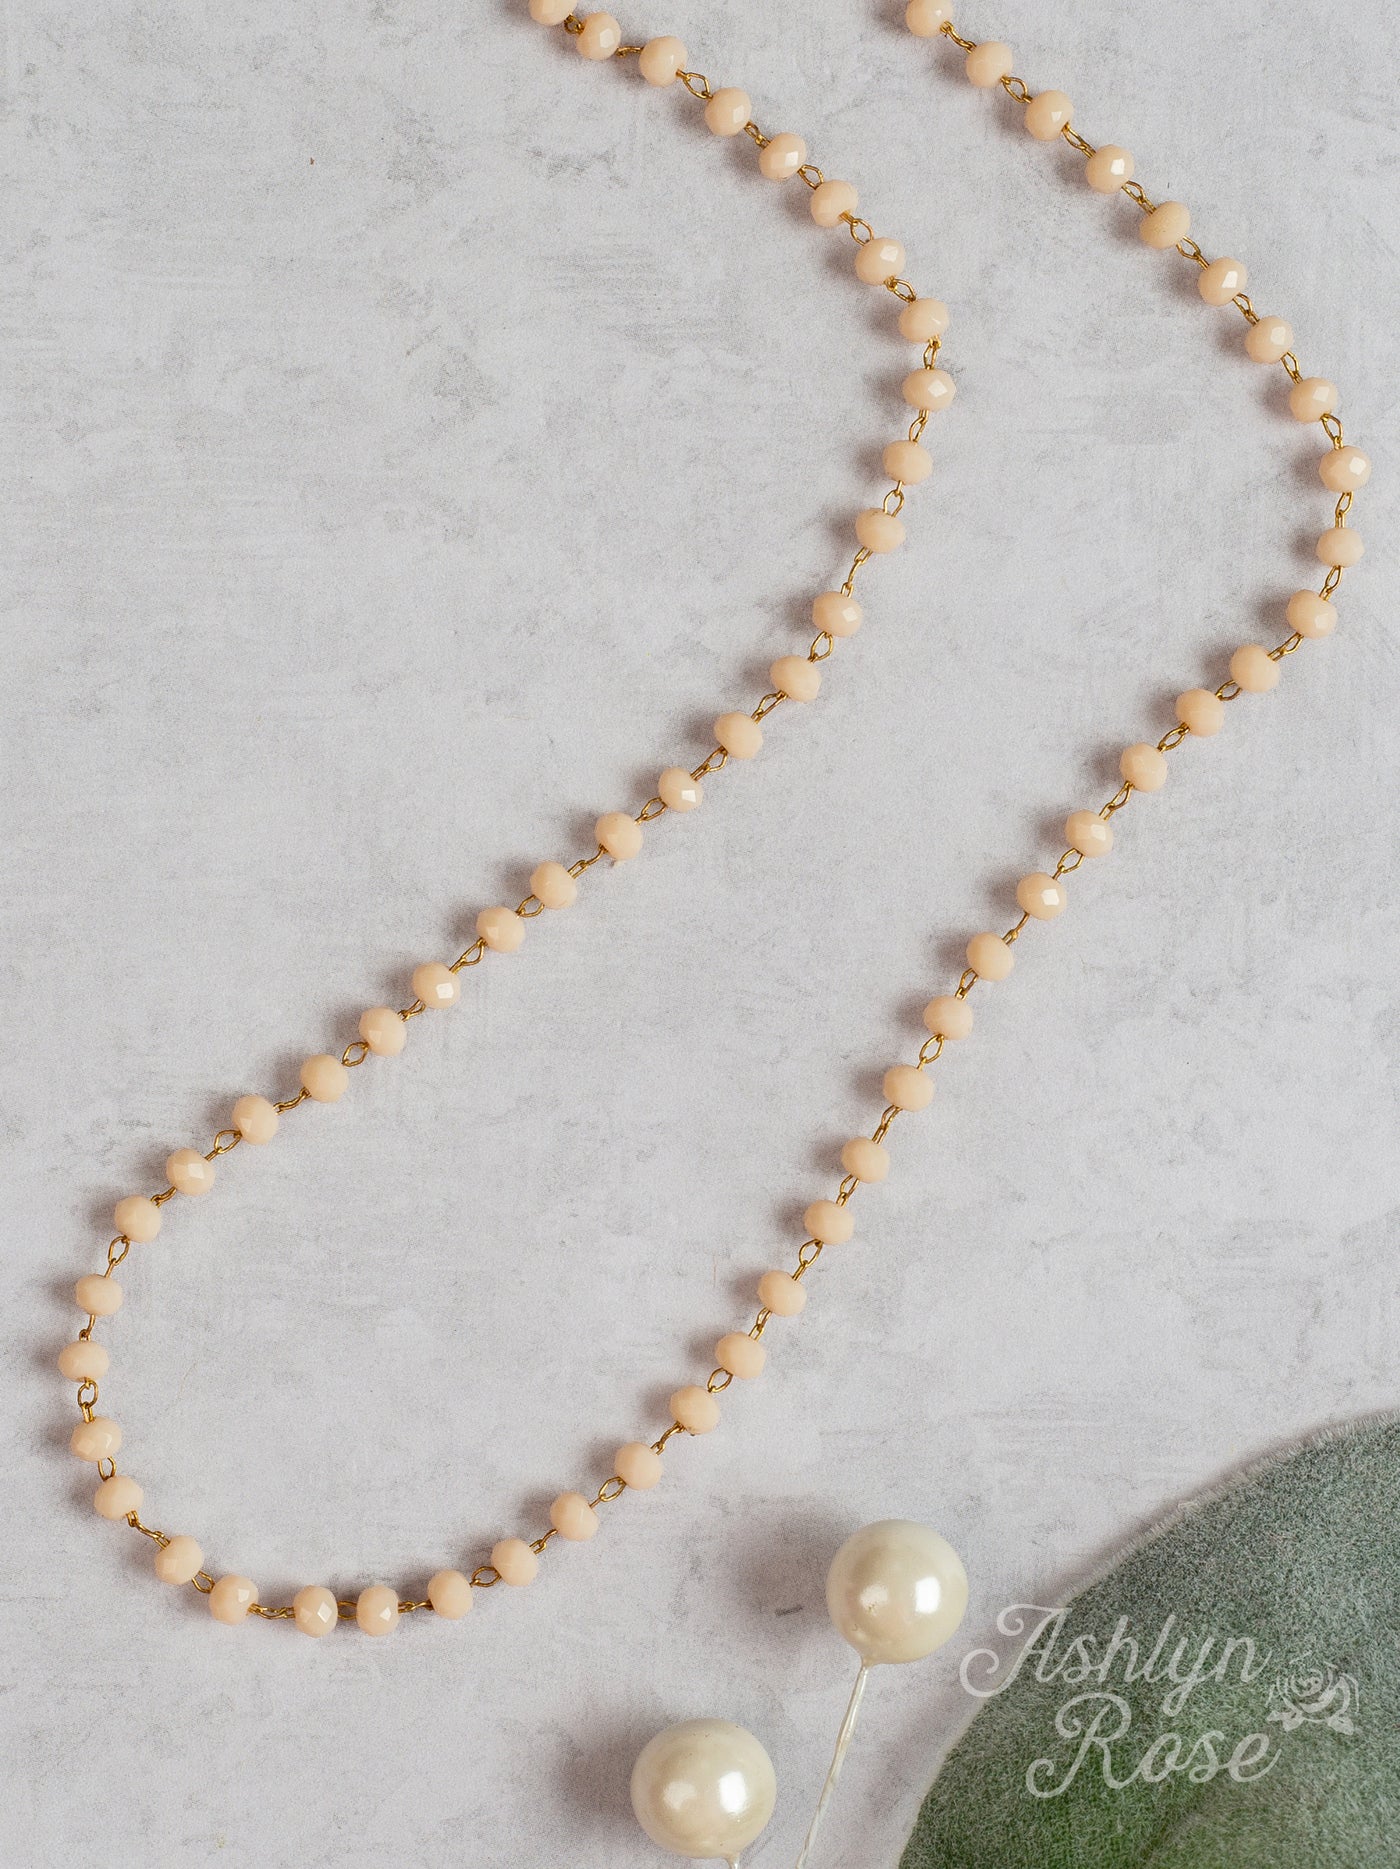 My Darling Rose Light Pink And Gold Beaded Necklace